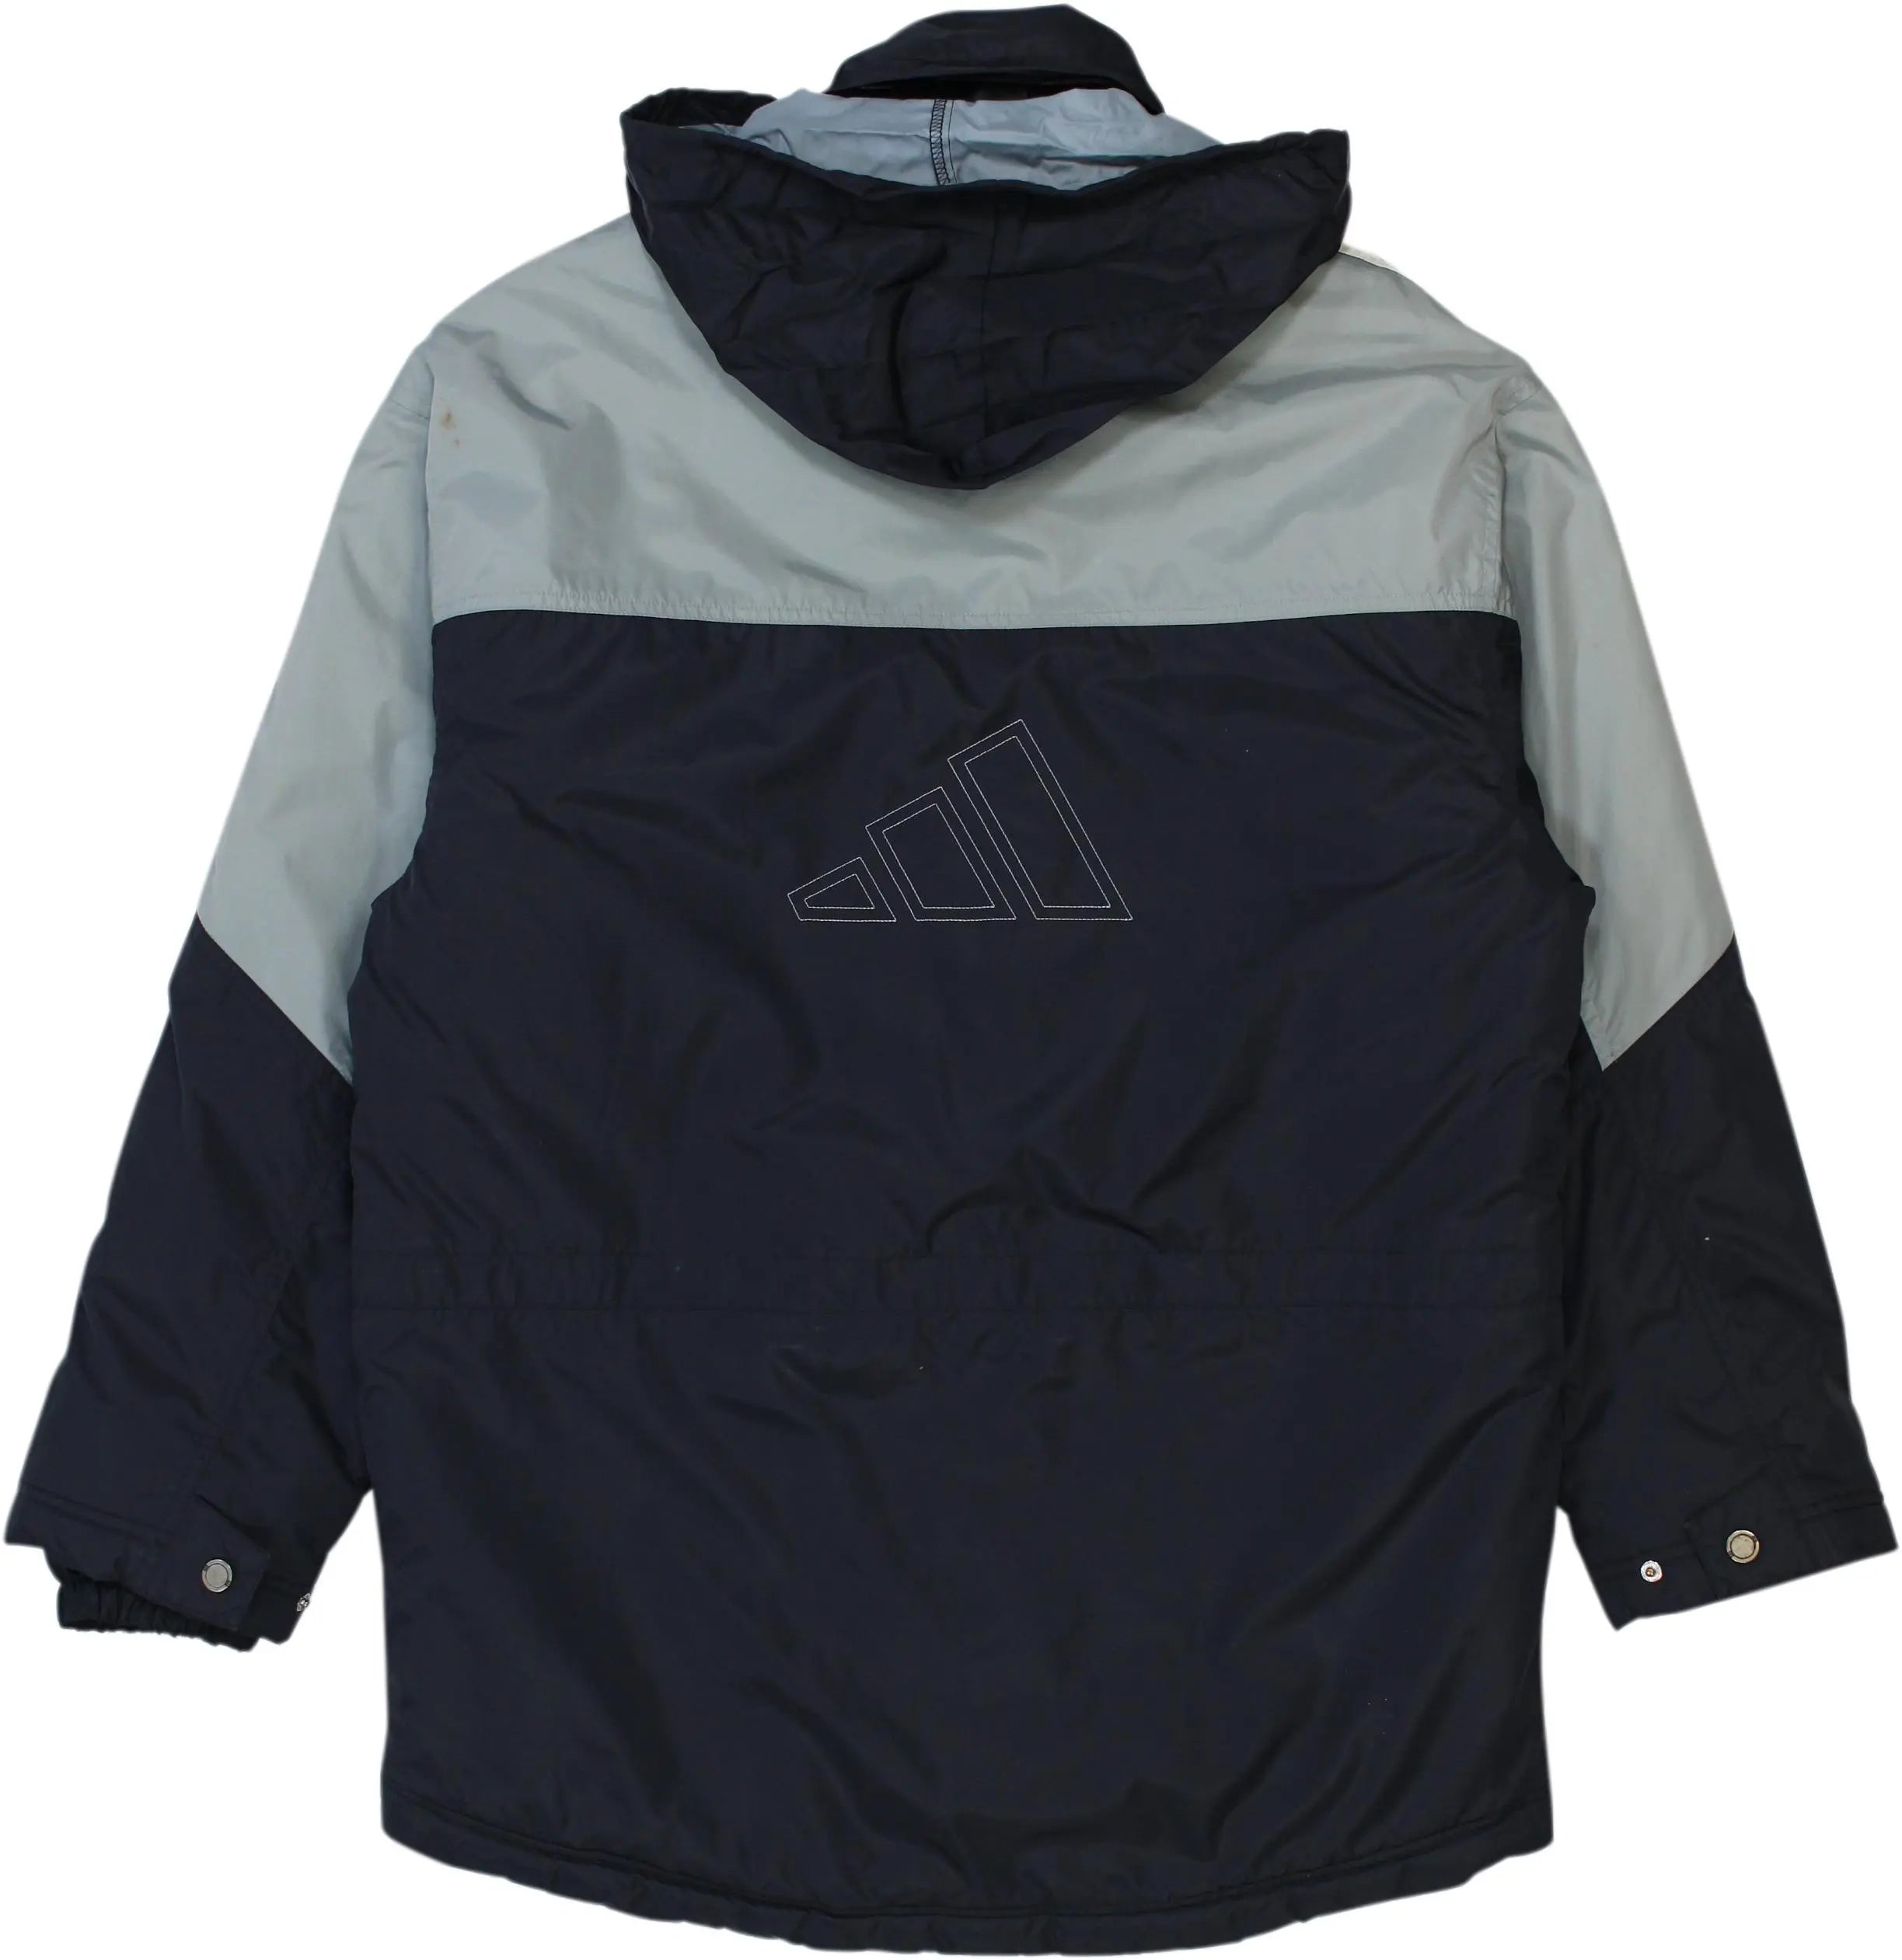 Adidas - Adidas Jacket- ThriftTale.com - Vintage and second handclothing